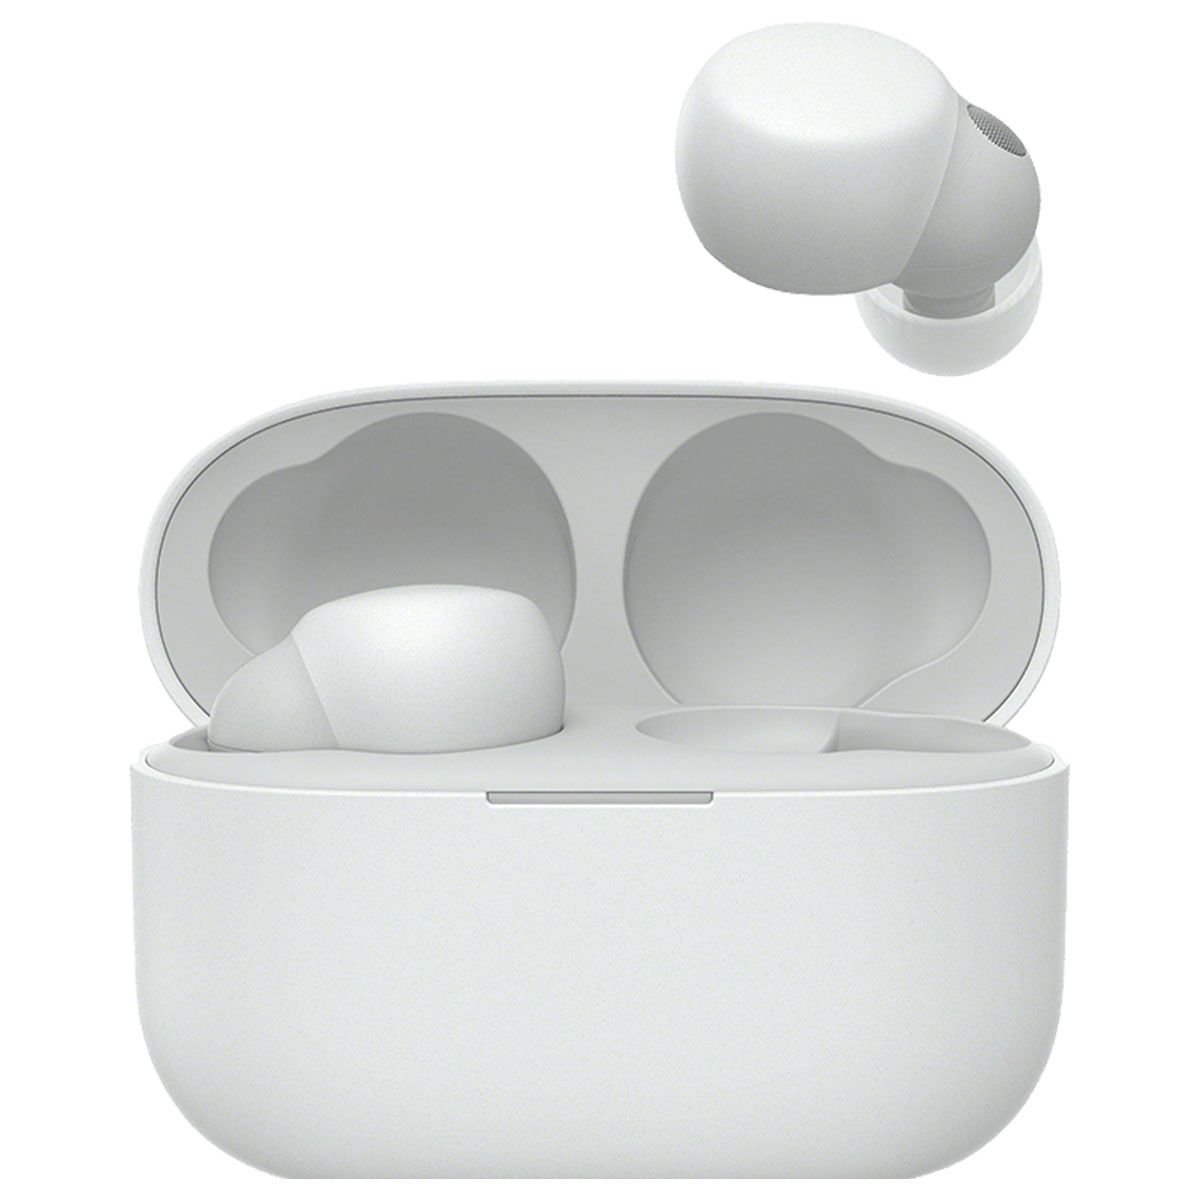 Sony Linkbuds S earbuds with case in white